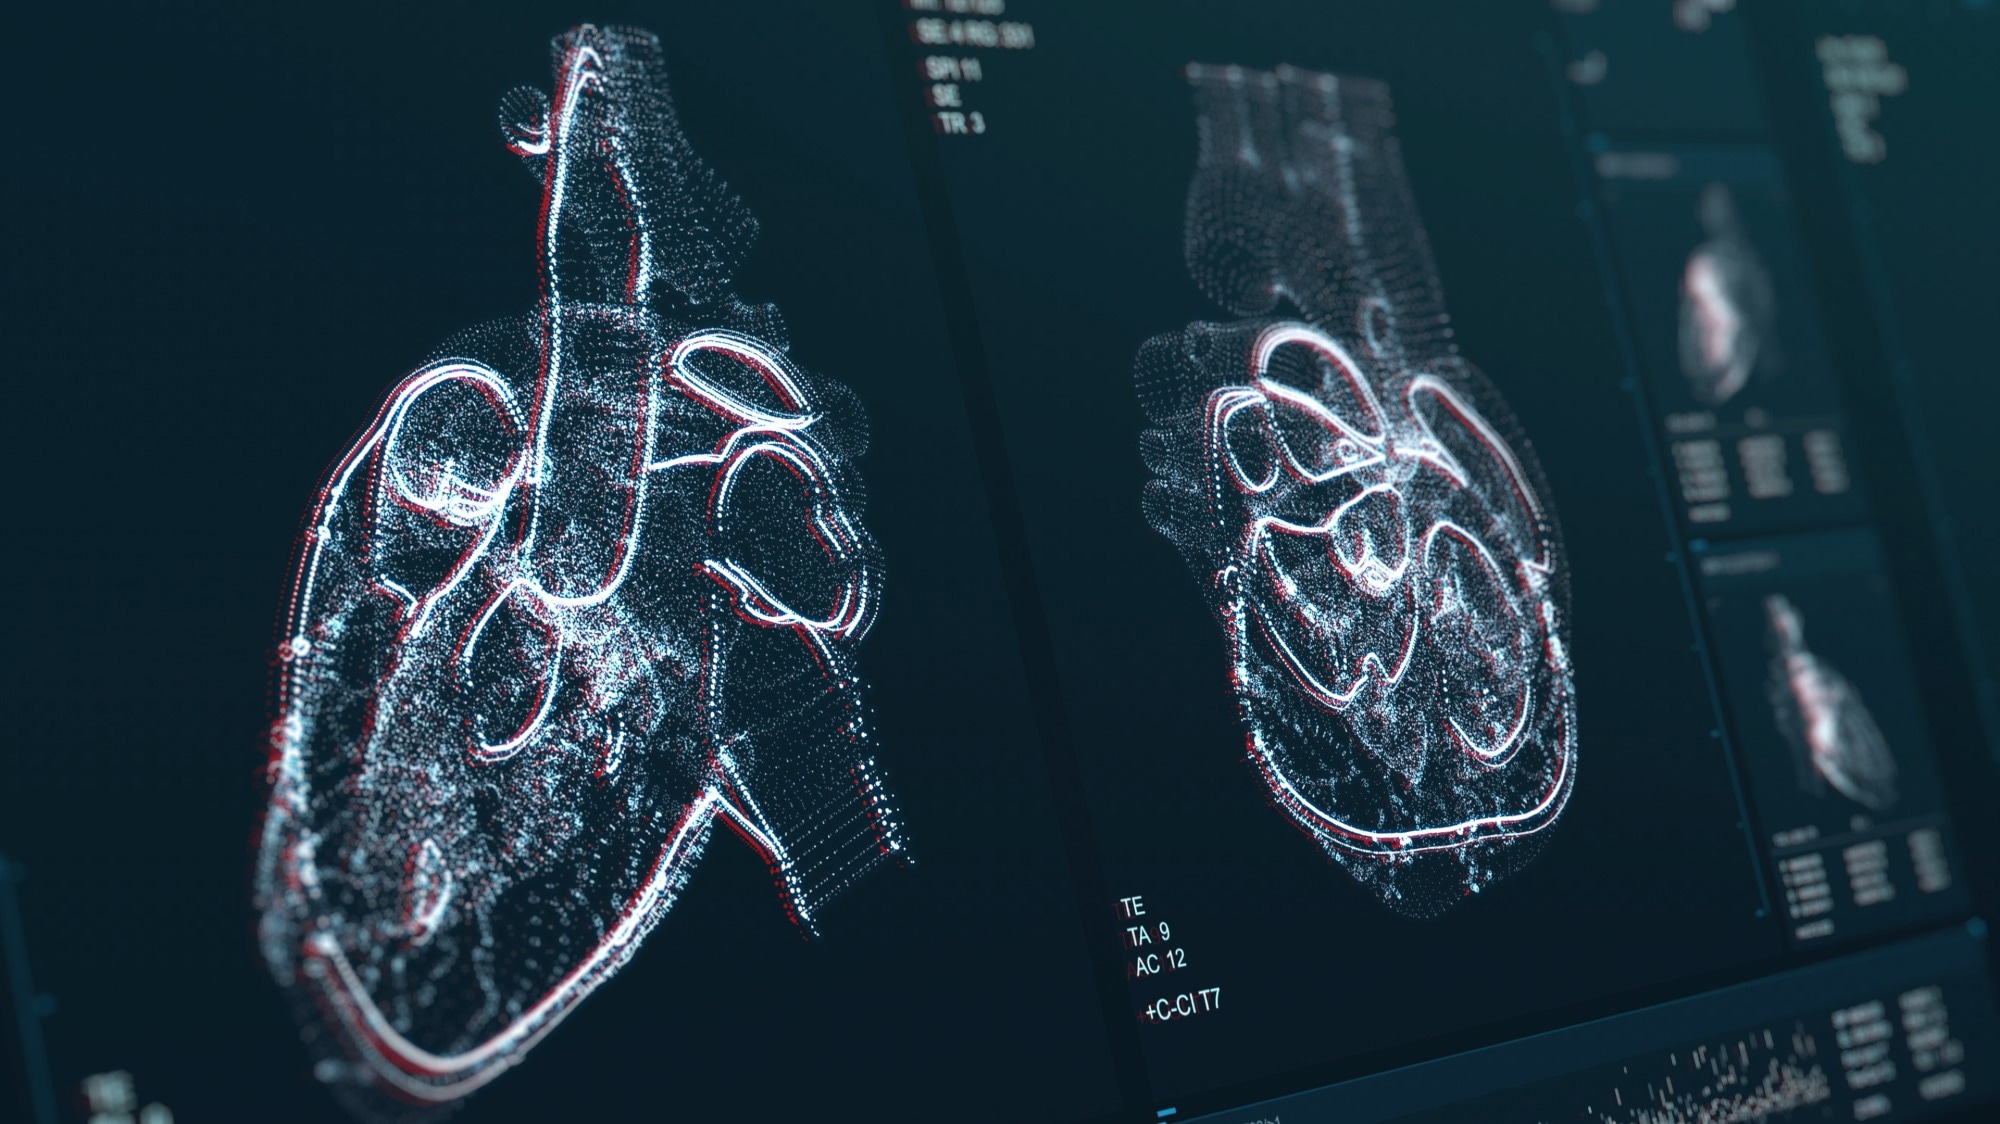 Study: Automated Large Vessel Occlusion Detection Software and Thrombectomy Treatment Times: A Cluster Randomized Clinical Trial. Image Credit: SquareMotion / Shutterstock.com